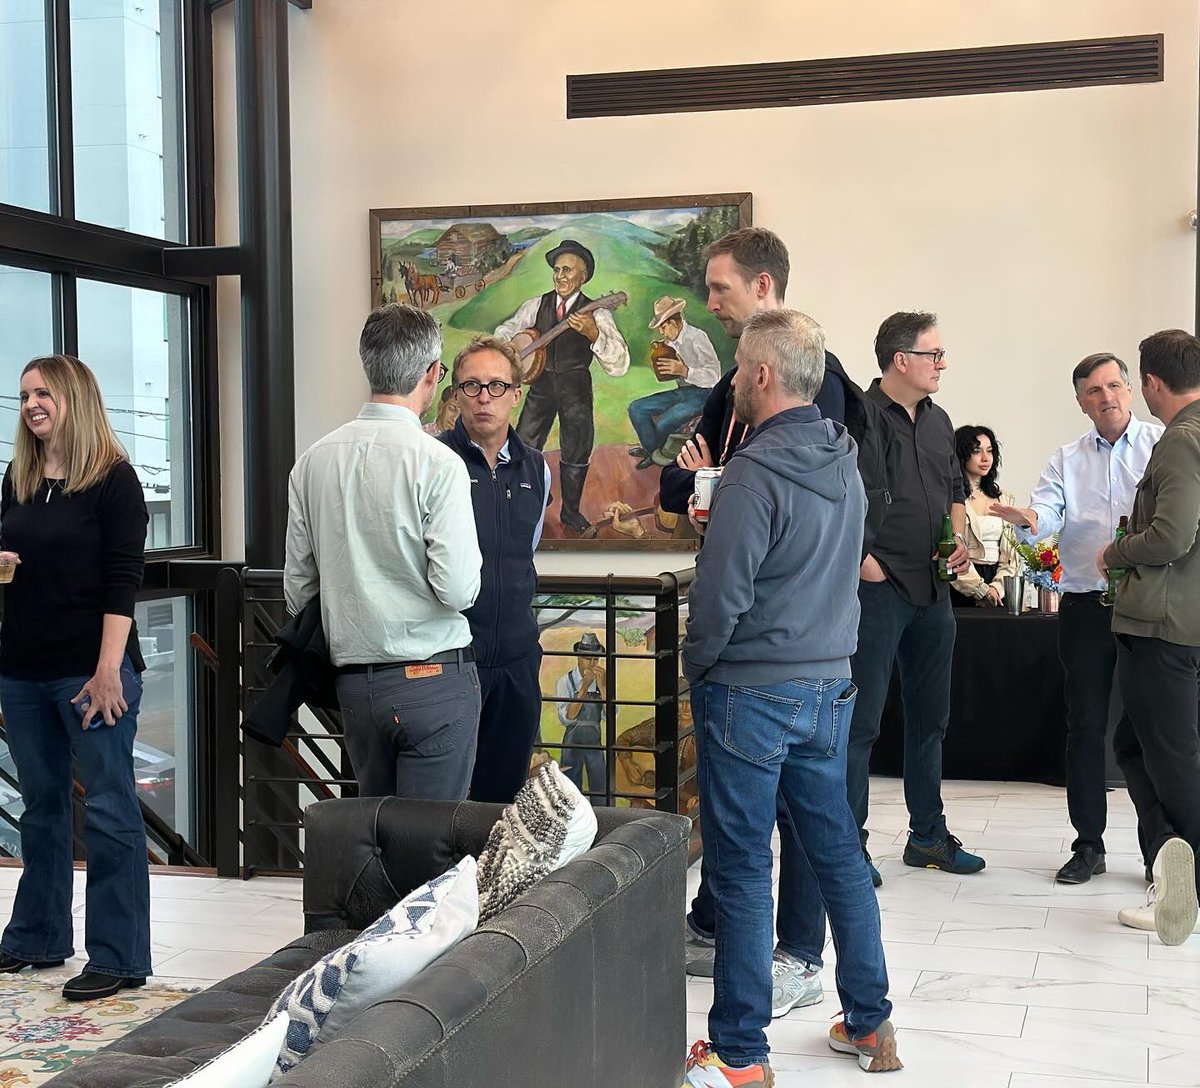 Kicking the @musicbizassoc week off right! 🙌 We had such a great time hanging out with our @peermusic team and friends. Here’s to the exciting week ahead! 🎶 Catering: @kladdercatering #peermusic #peermusicnashville #nashvilletn #musicrow #musicpublishing #musicbiz